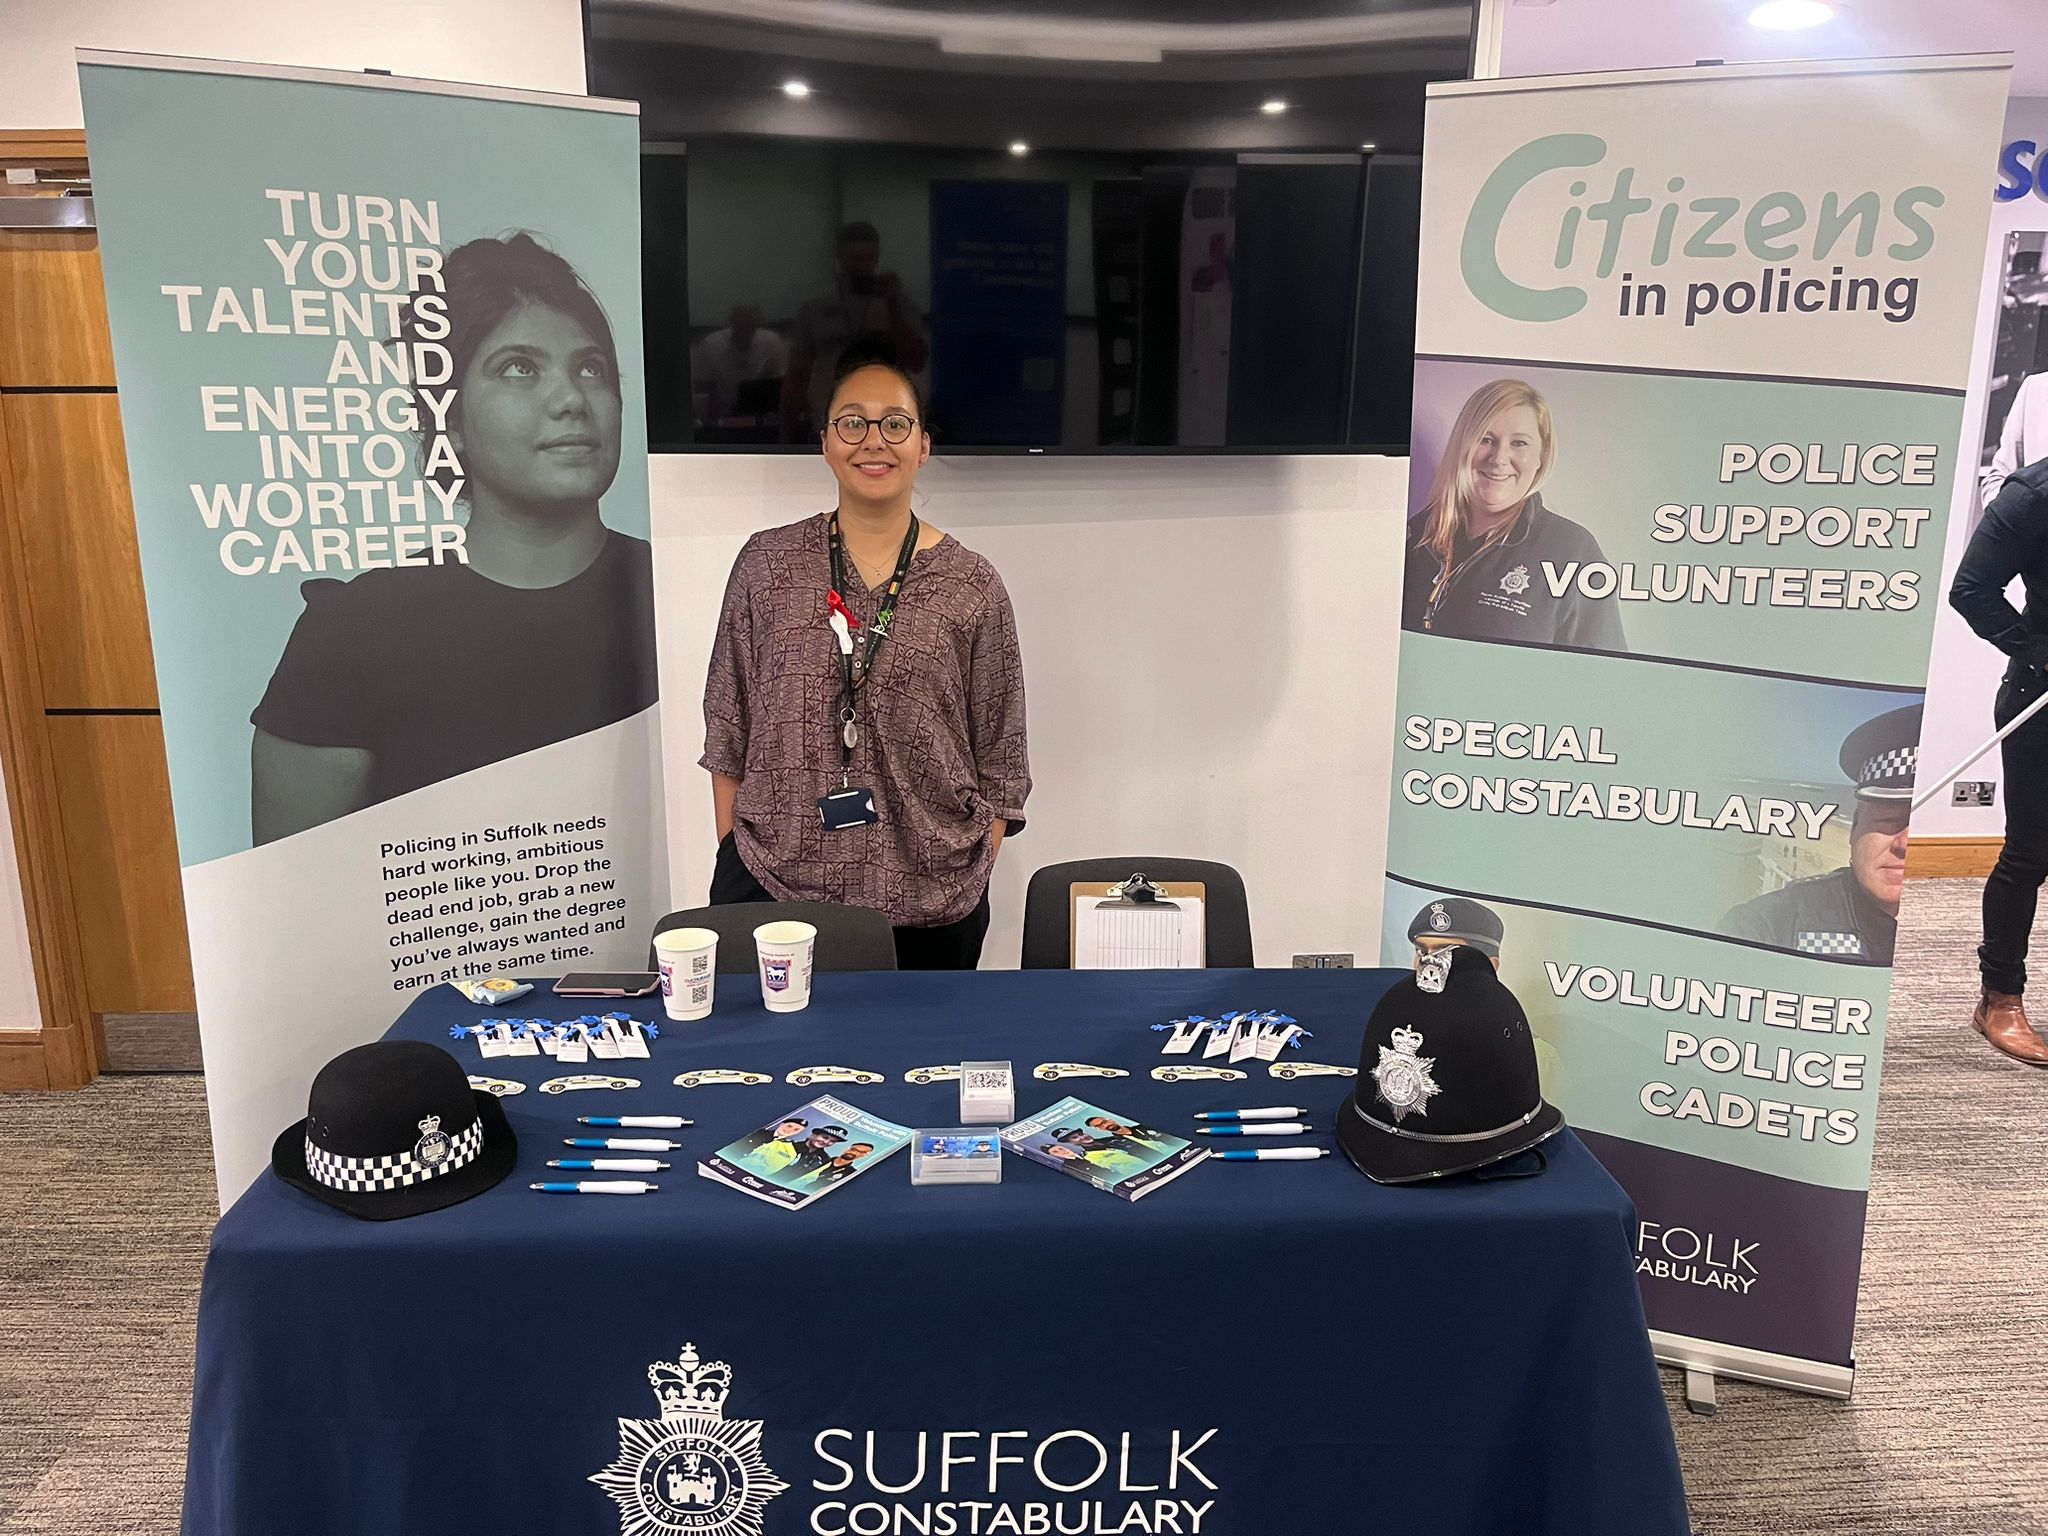 Suffolk Constabulary at our event in Ipswich